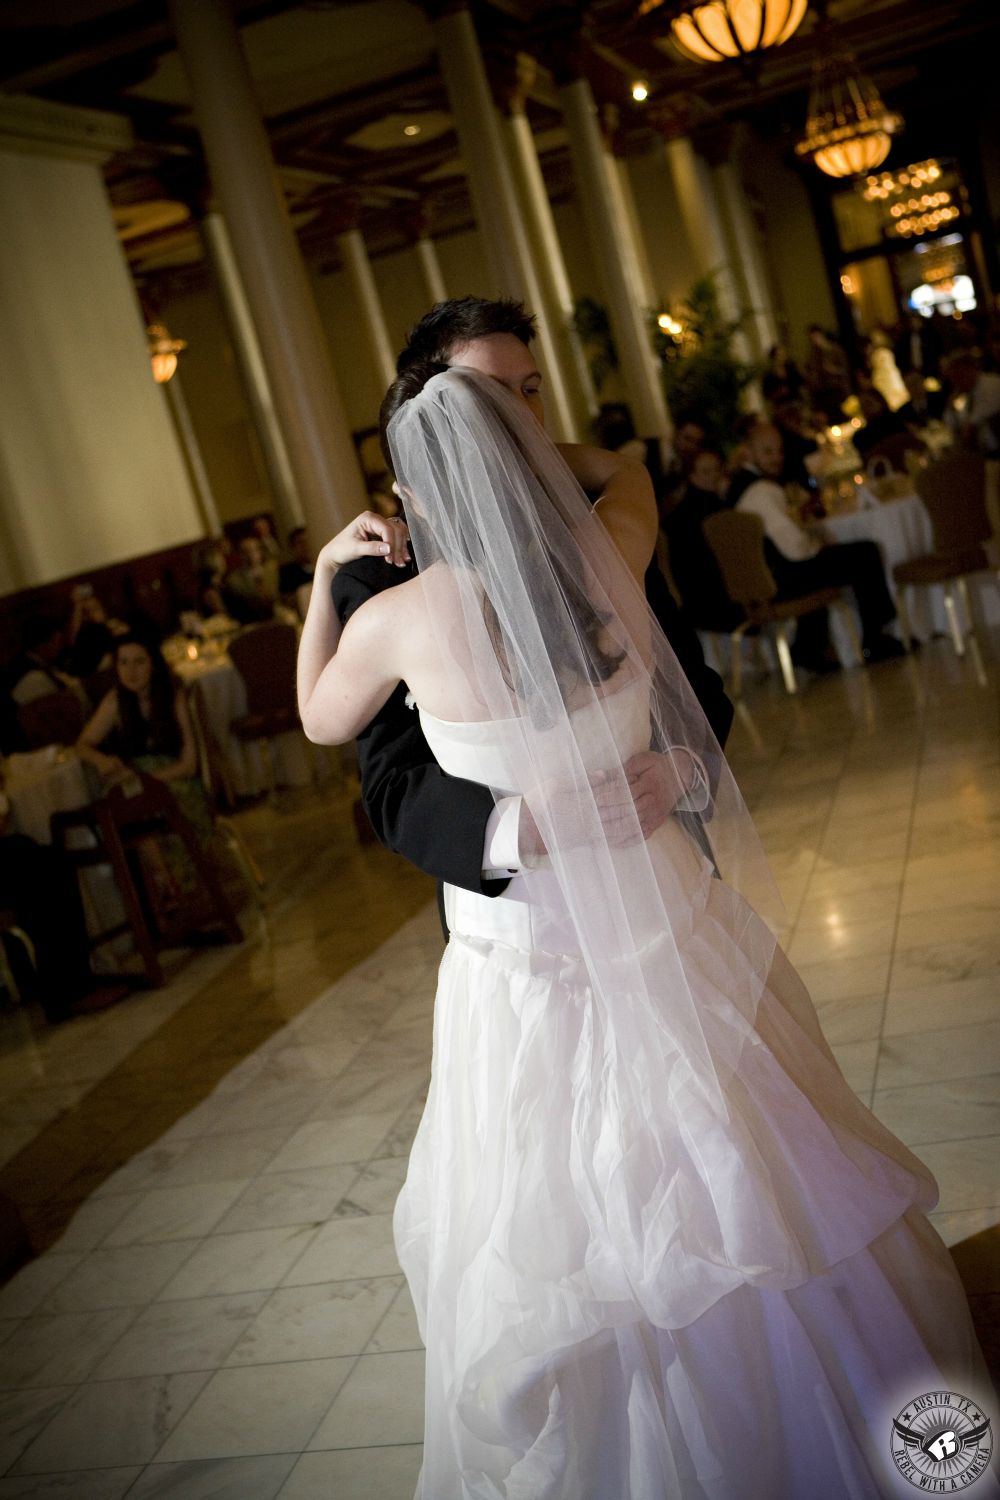 Picture of wedding couple's first dance at their wedding reception DJ Altared Weddings Austin wedding DJ at the Driskill Hotel Austin wedding venue in downtown Austin taken by Austin wedding photographer.